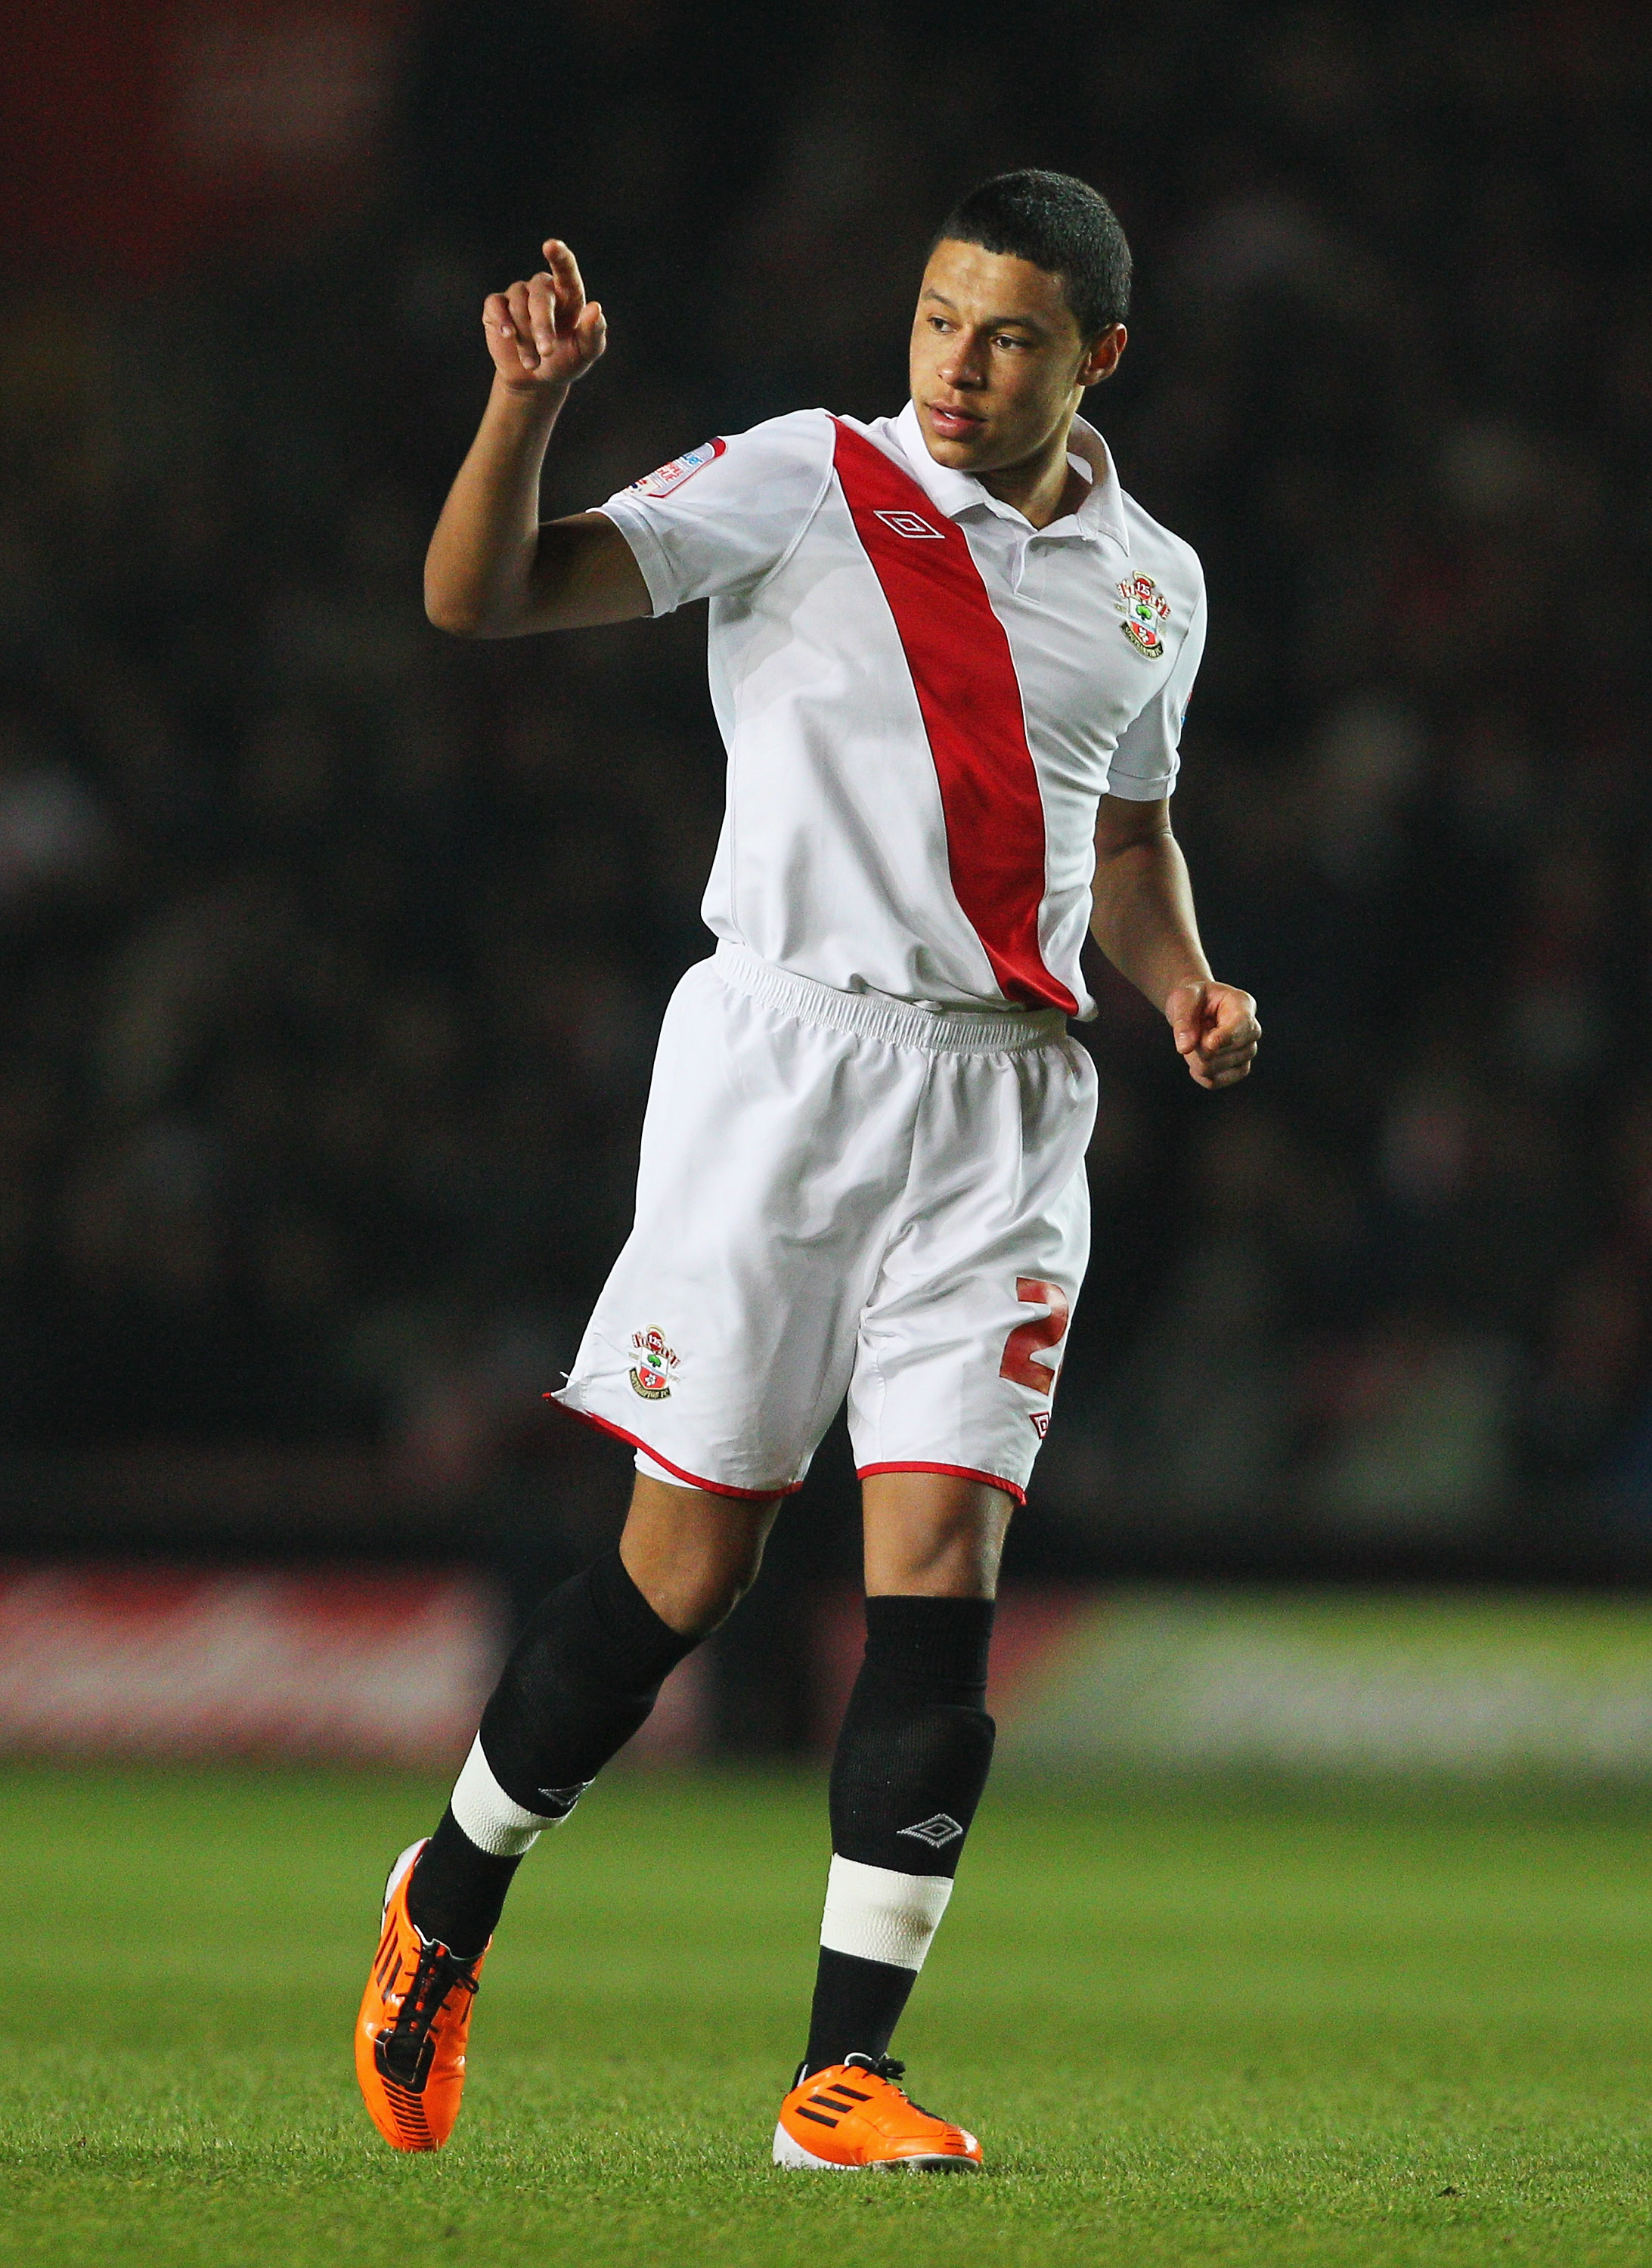 SOUTHAMPTON, ENGLAND - JANUARY 29:  Alex Chamberlain of Southampton points during the FA Cup sponsored by E.ON 4th Round match between Southampton and Manchester United at St Mary's Stadium on January 29, 2011 in Southampton, England.  (Photo by Clive Ros